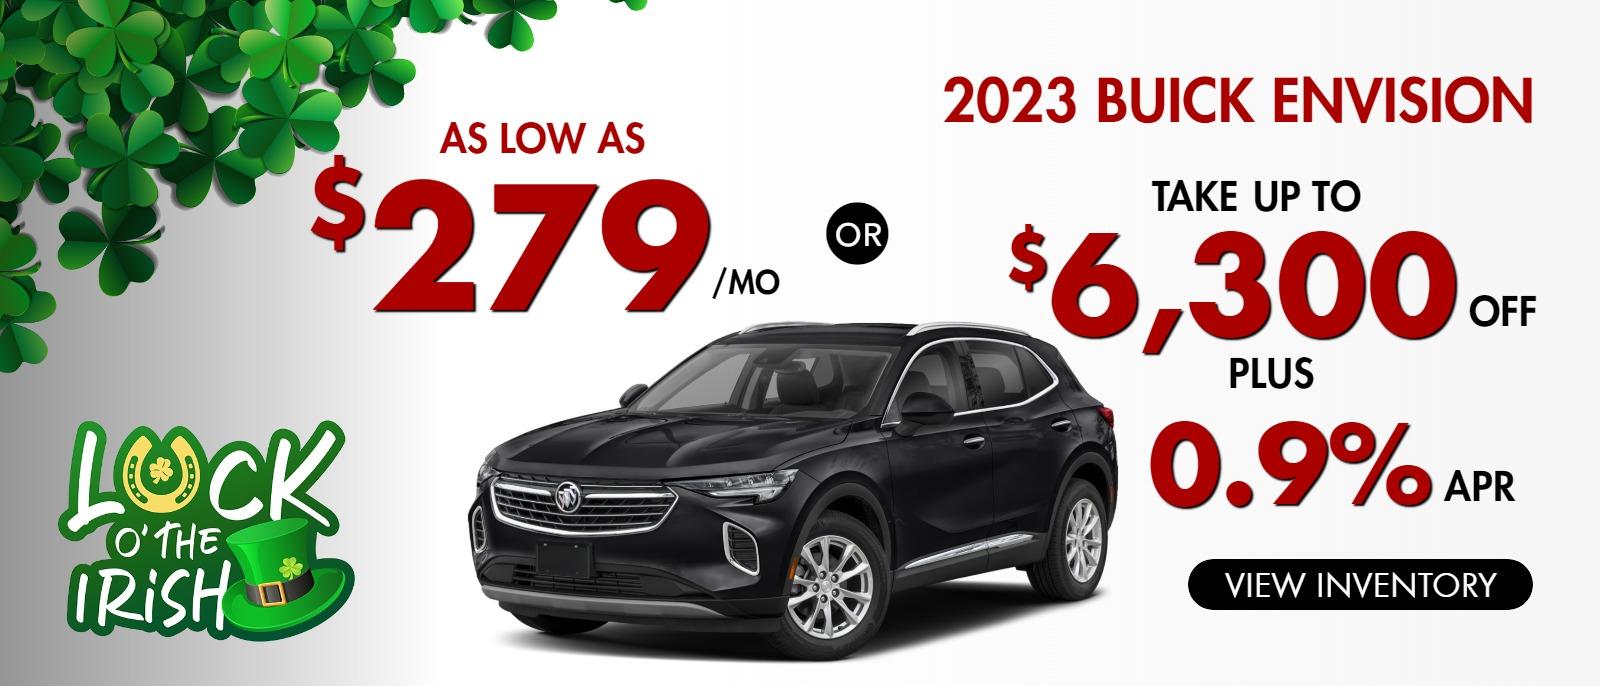 2023 Envision
Stock B4707

take up to $6300 OFF 

OR AS LOW AS
$279/mo
PLUS
0.9% finance